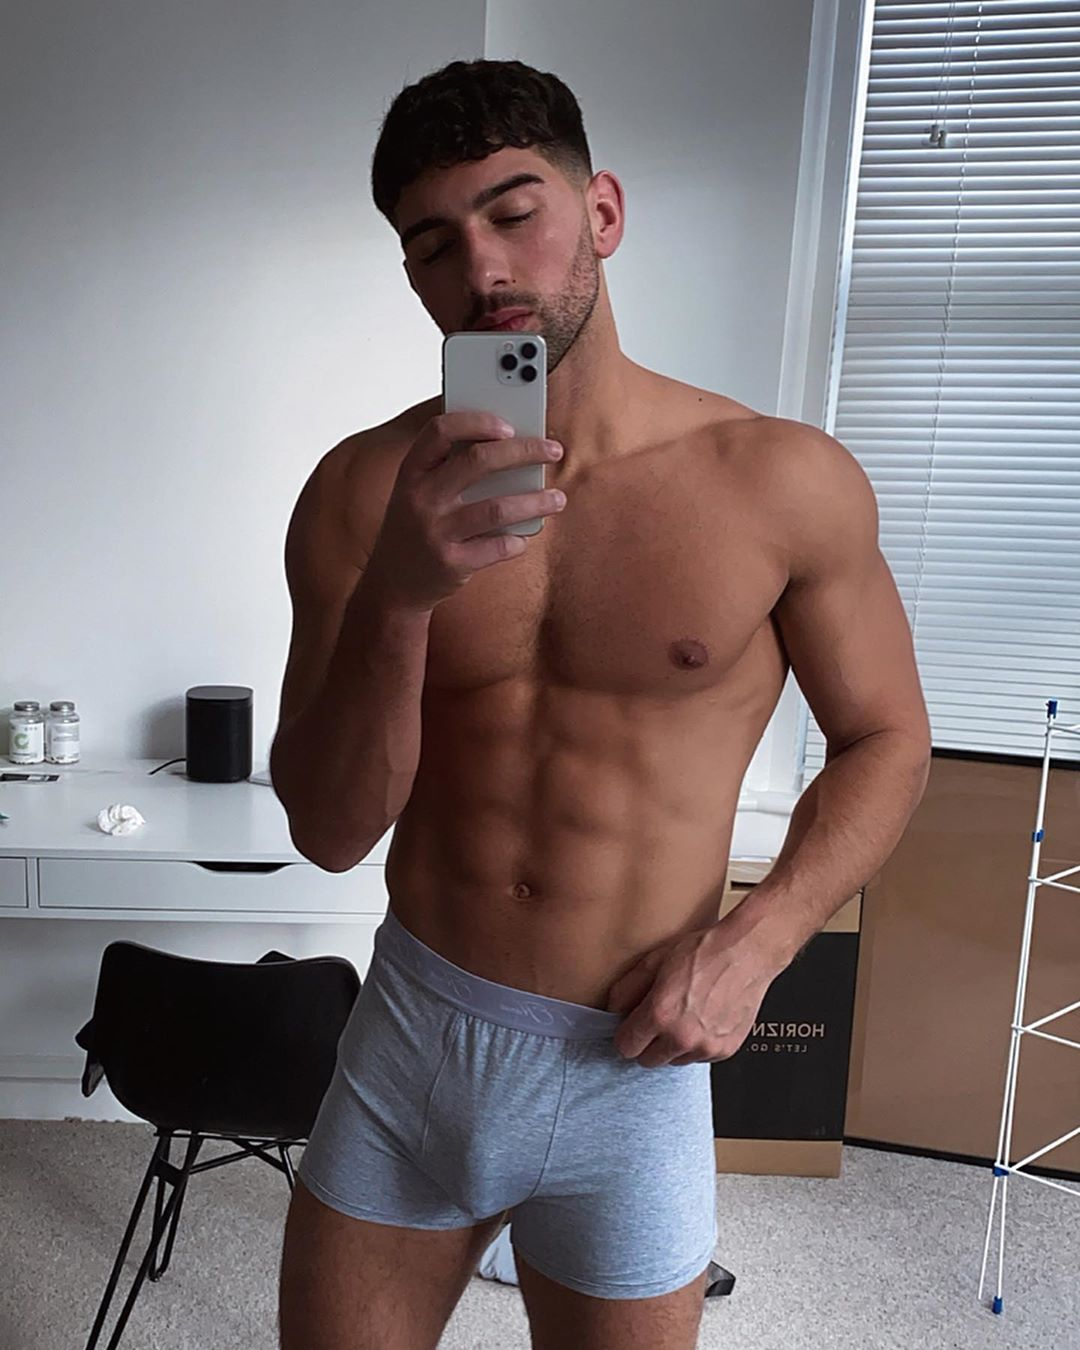 cesar olvera recommends huge bulge in shorts pic